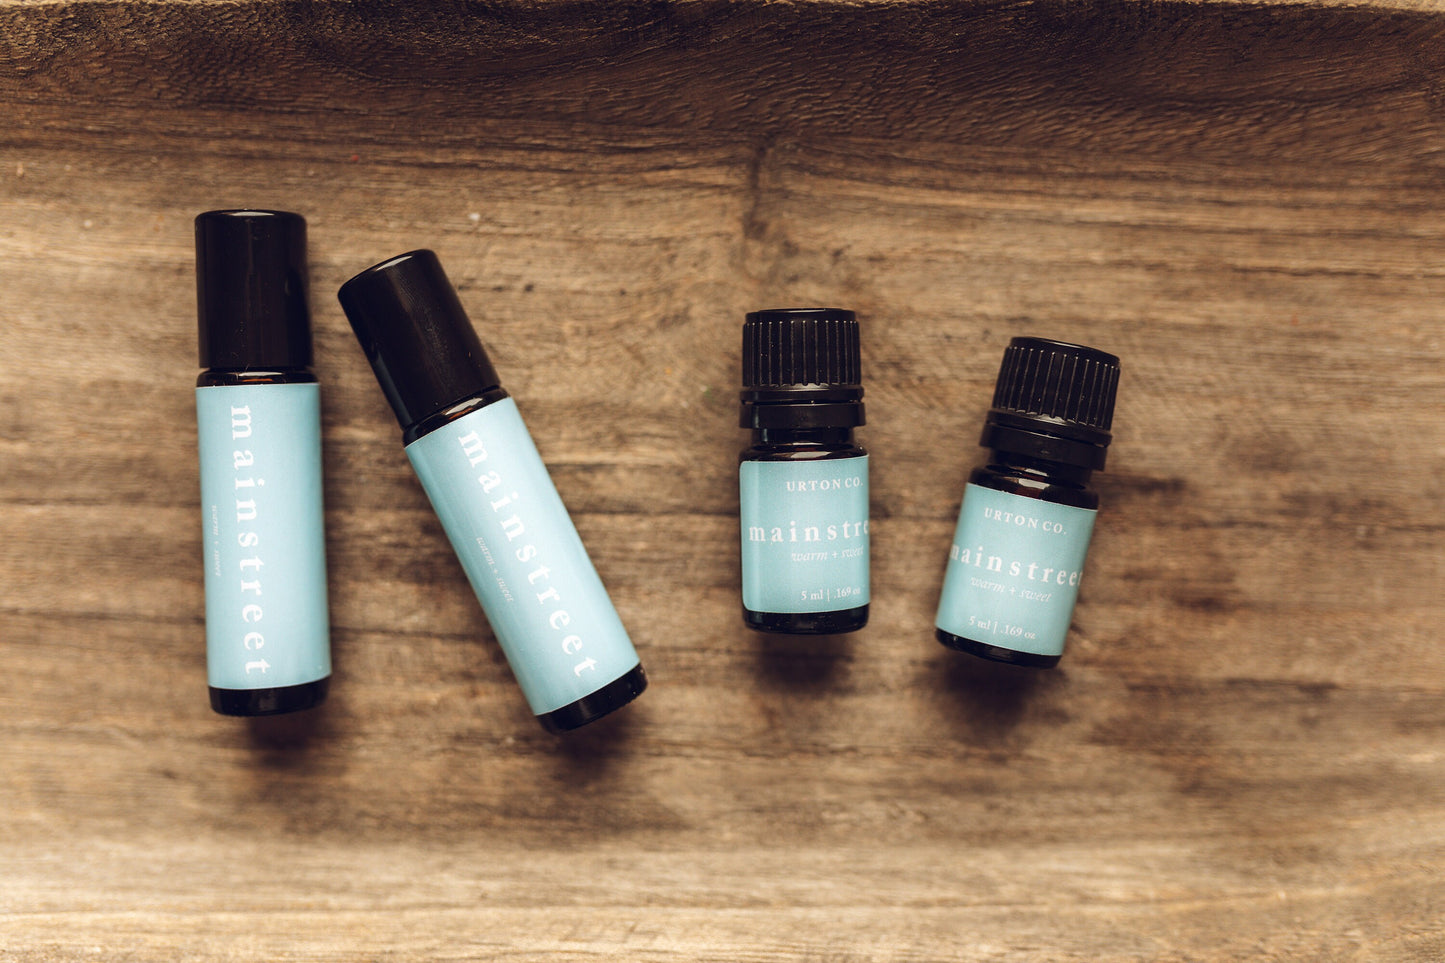 Main Street USA Magic: Disney-Inspired Roll-On Essential Oil Blend - Enchanting Aromatherapy on the Go! | Disney Essential Oil Blend | Gift